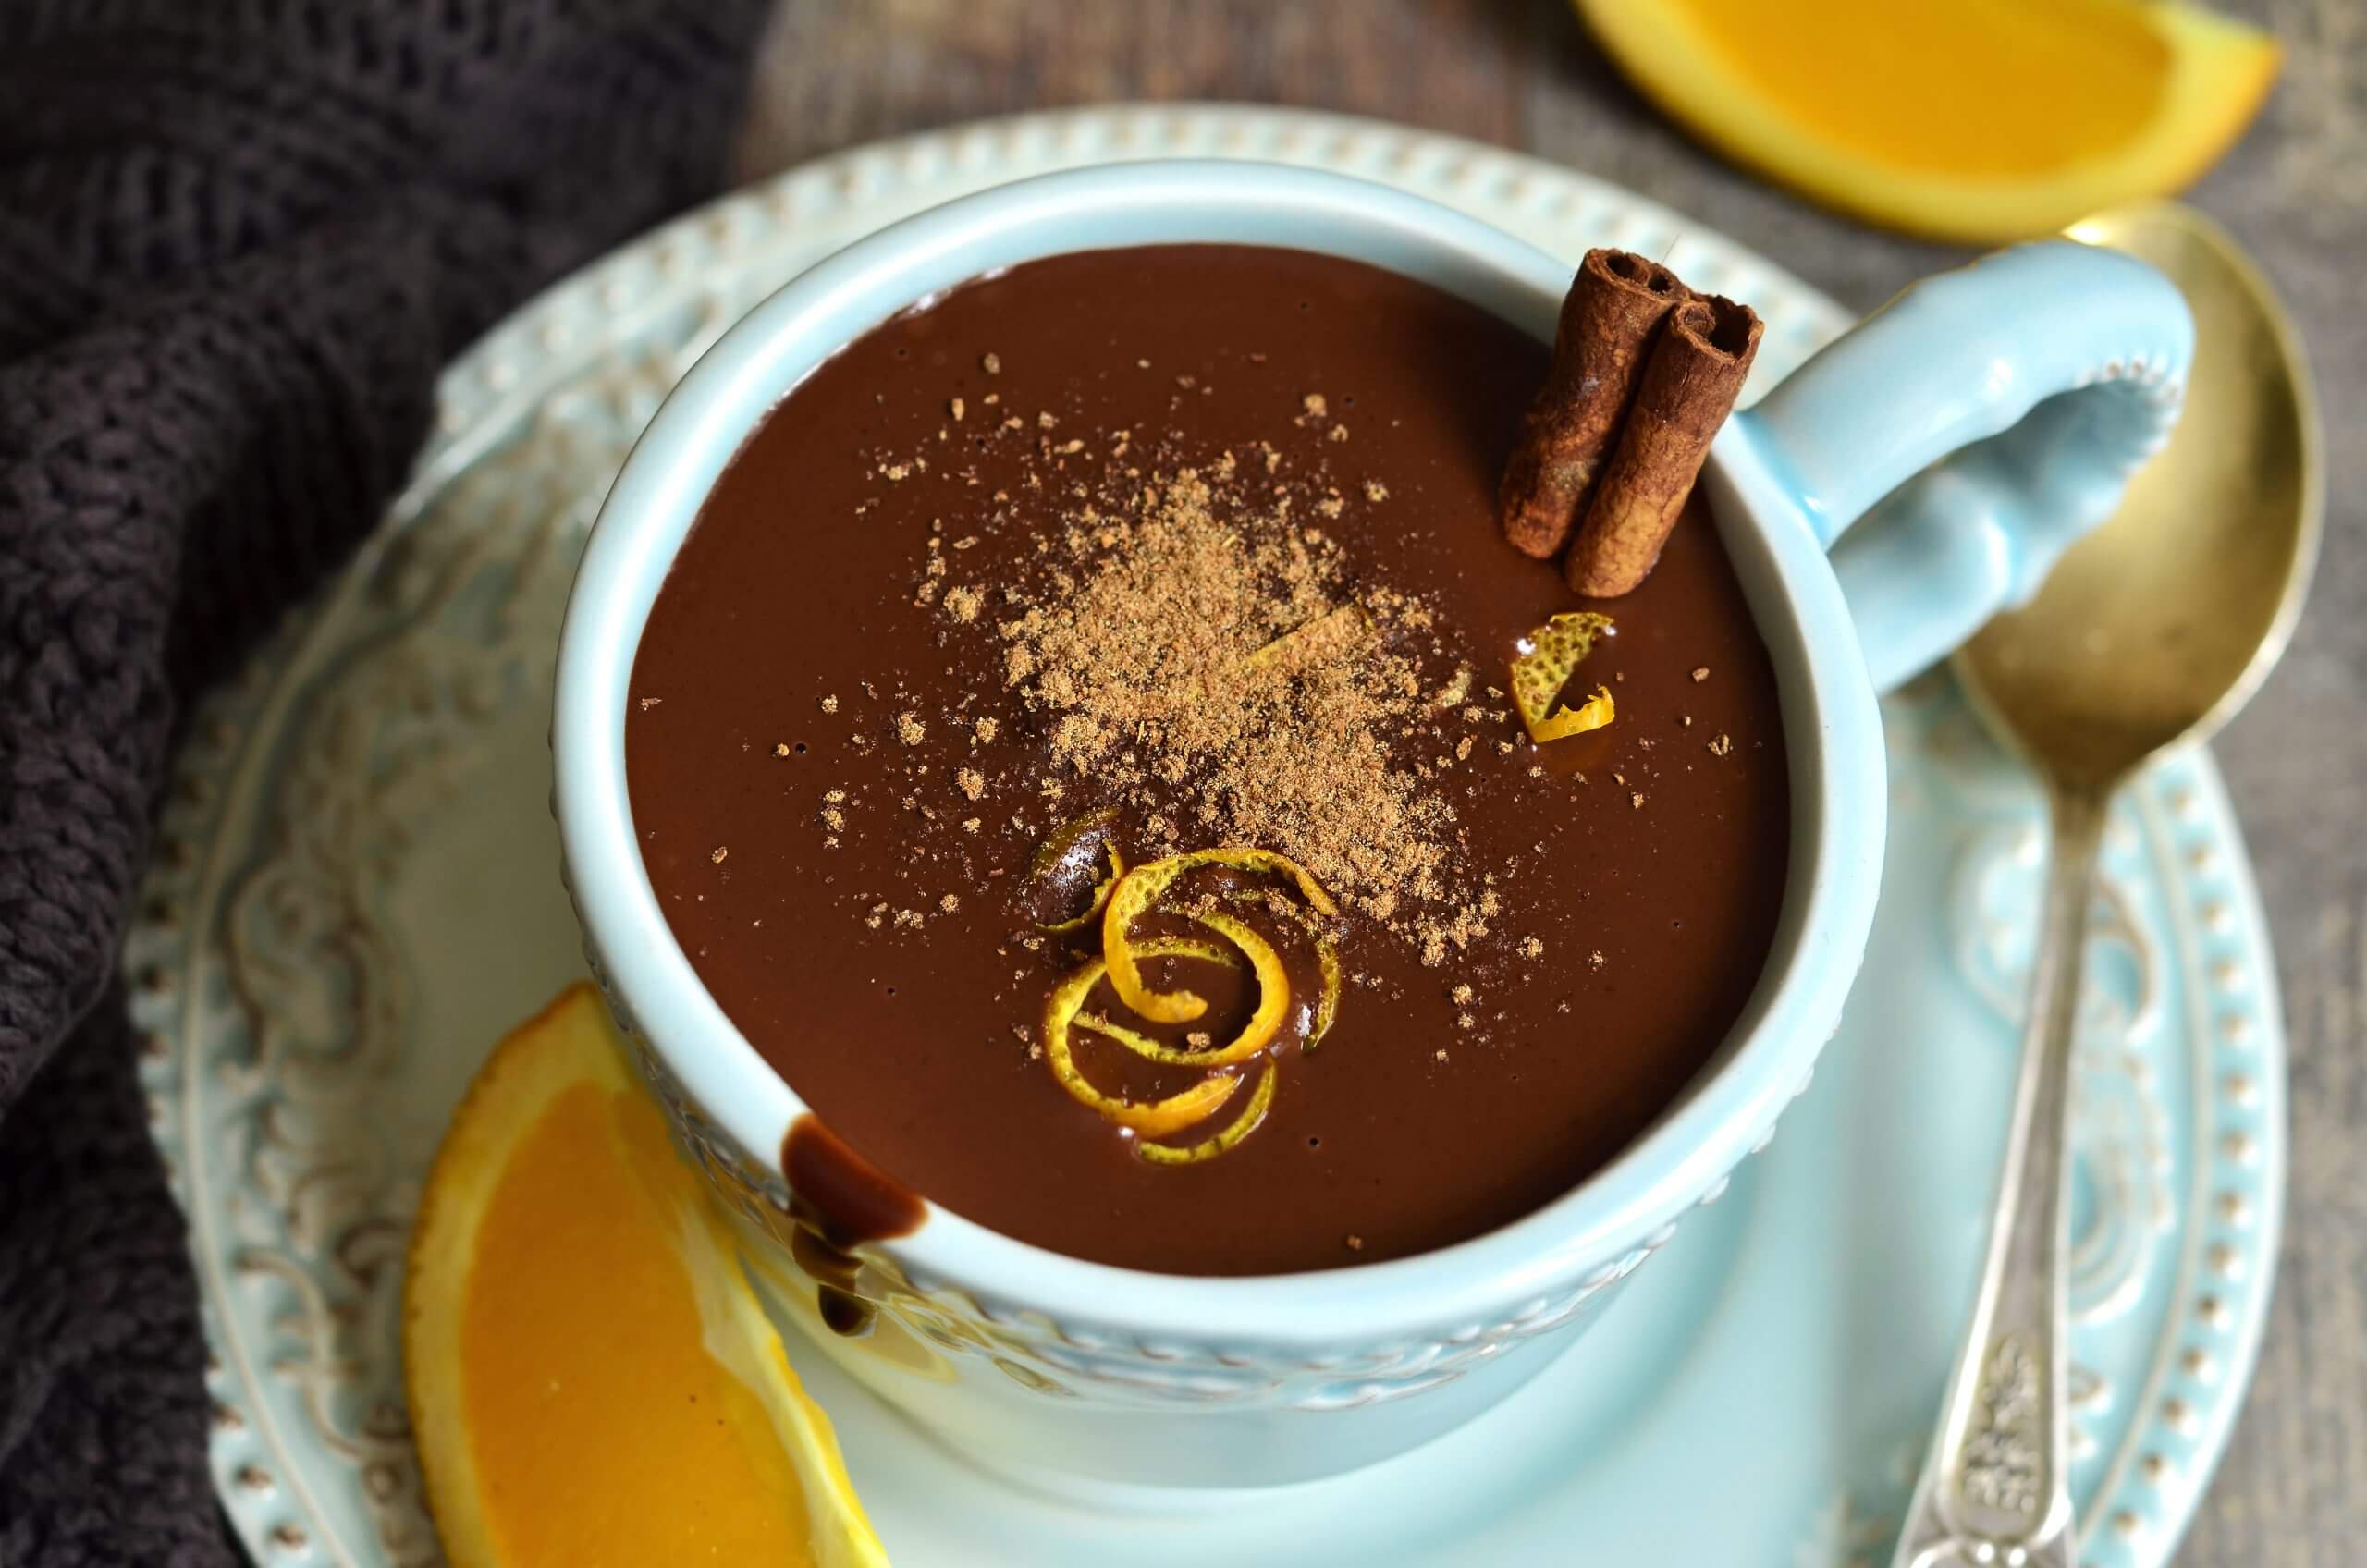 Hot chocolate drink made from cacao, cinnamon, and orange puree